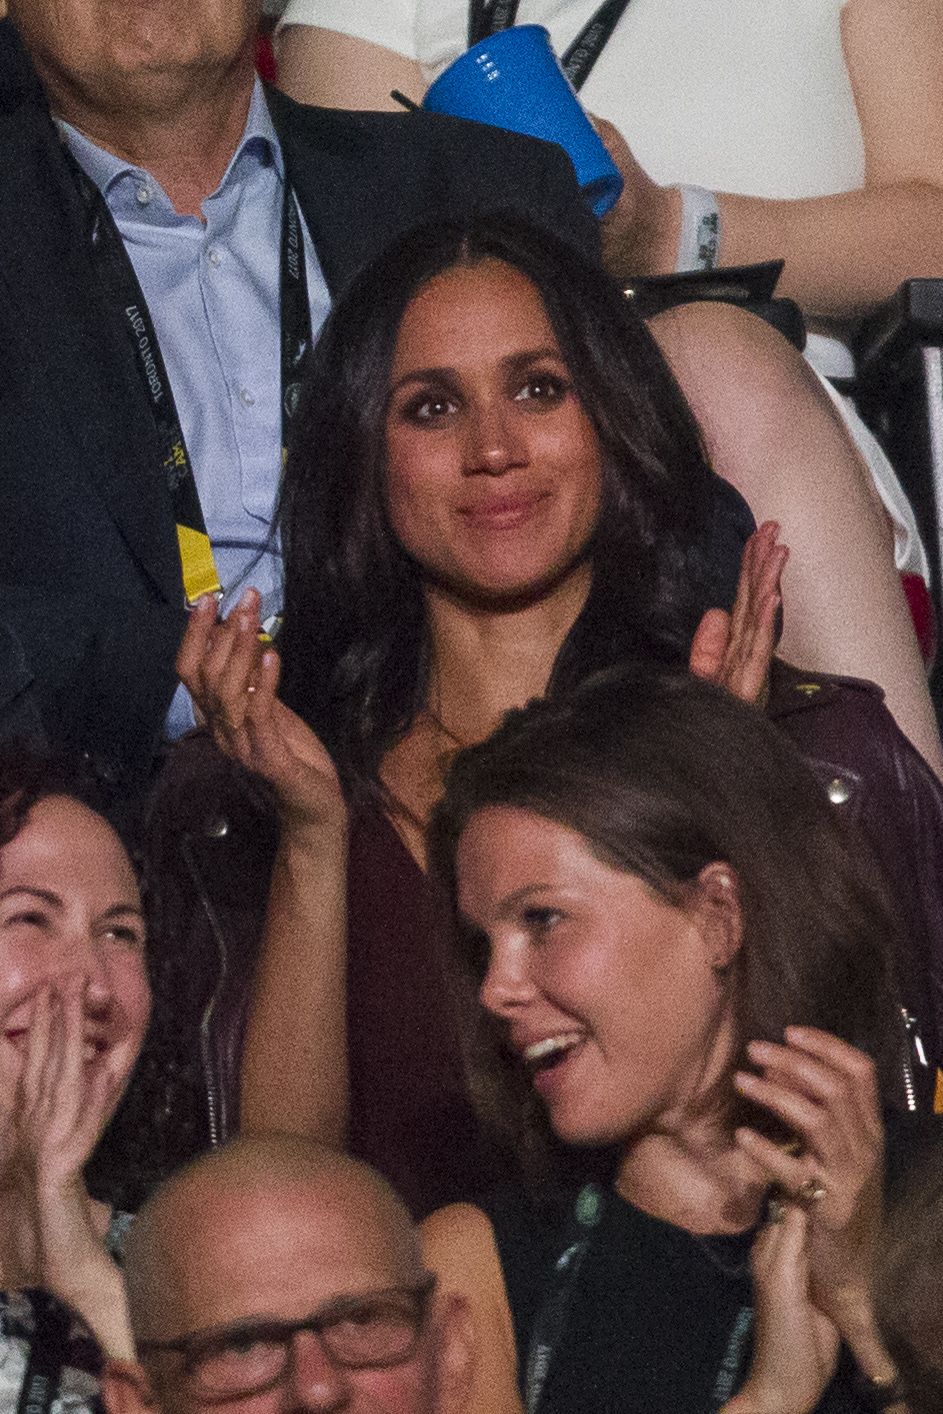 Meghan Markle, said to be Prince Harry's girlfriend, applauds during the opening ceremonies of the Invictus Games in Toronto, Ontario, September 23, 2017.Since the 